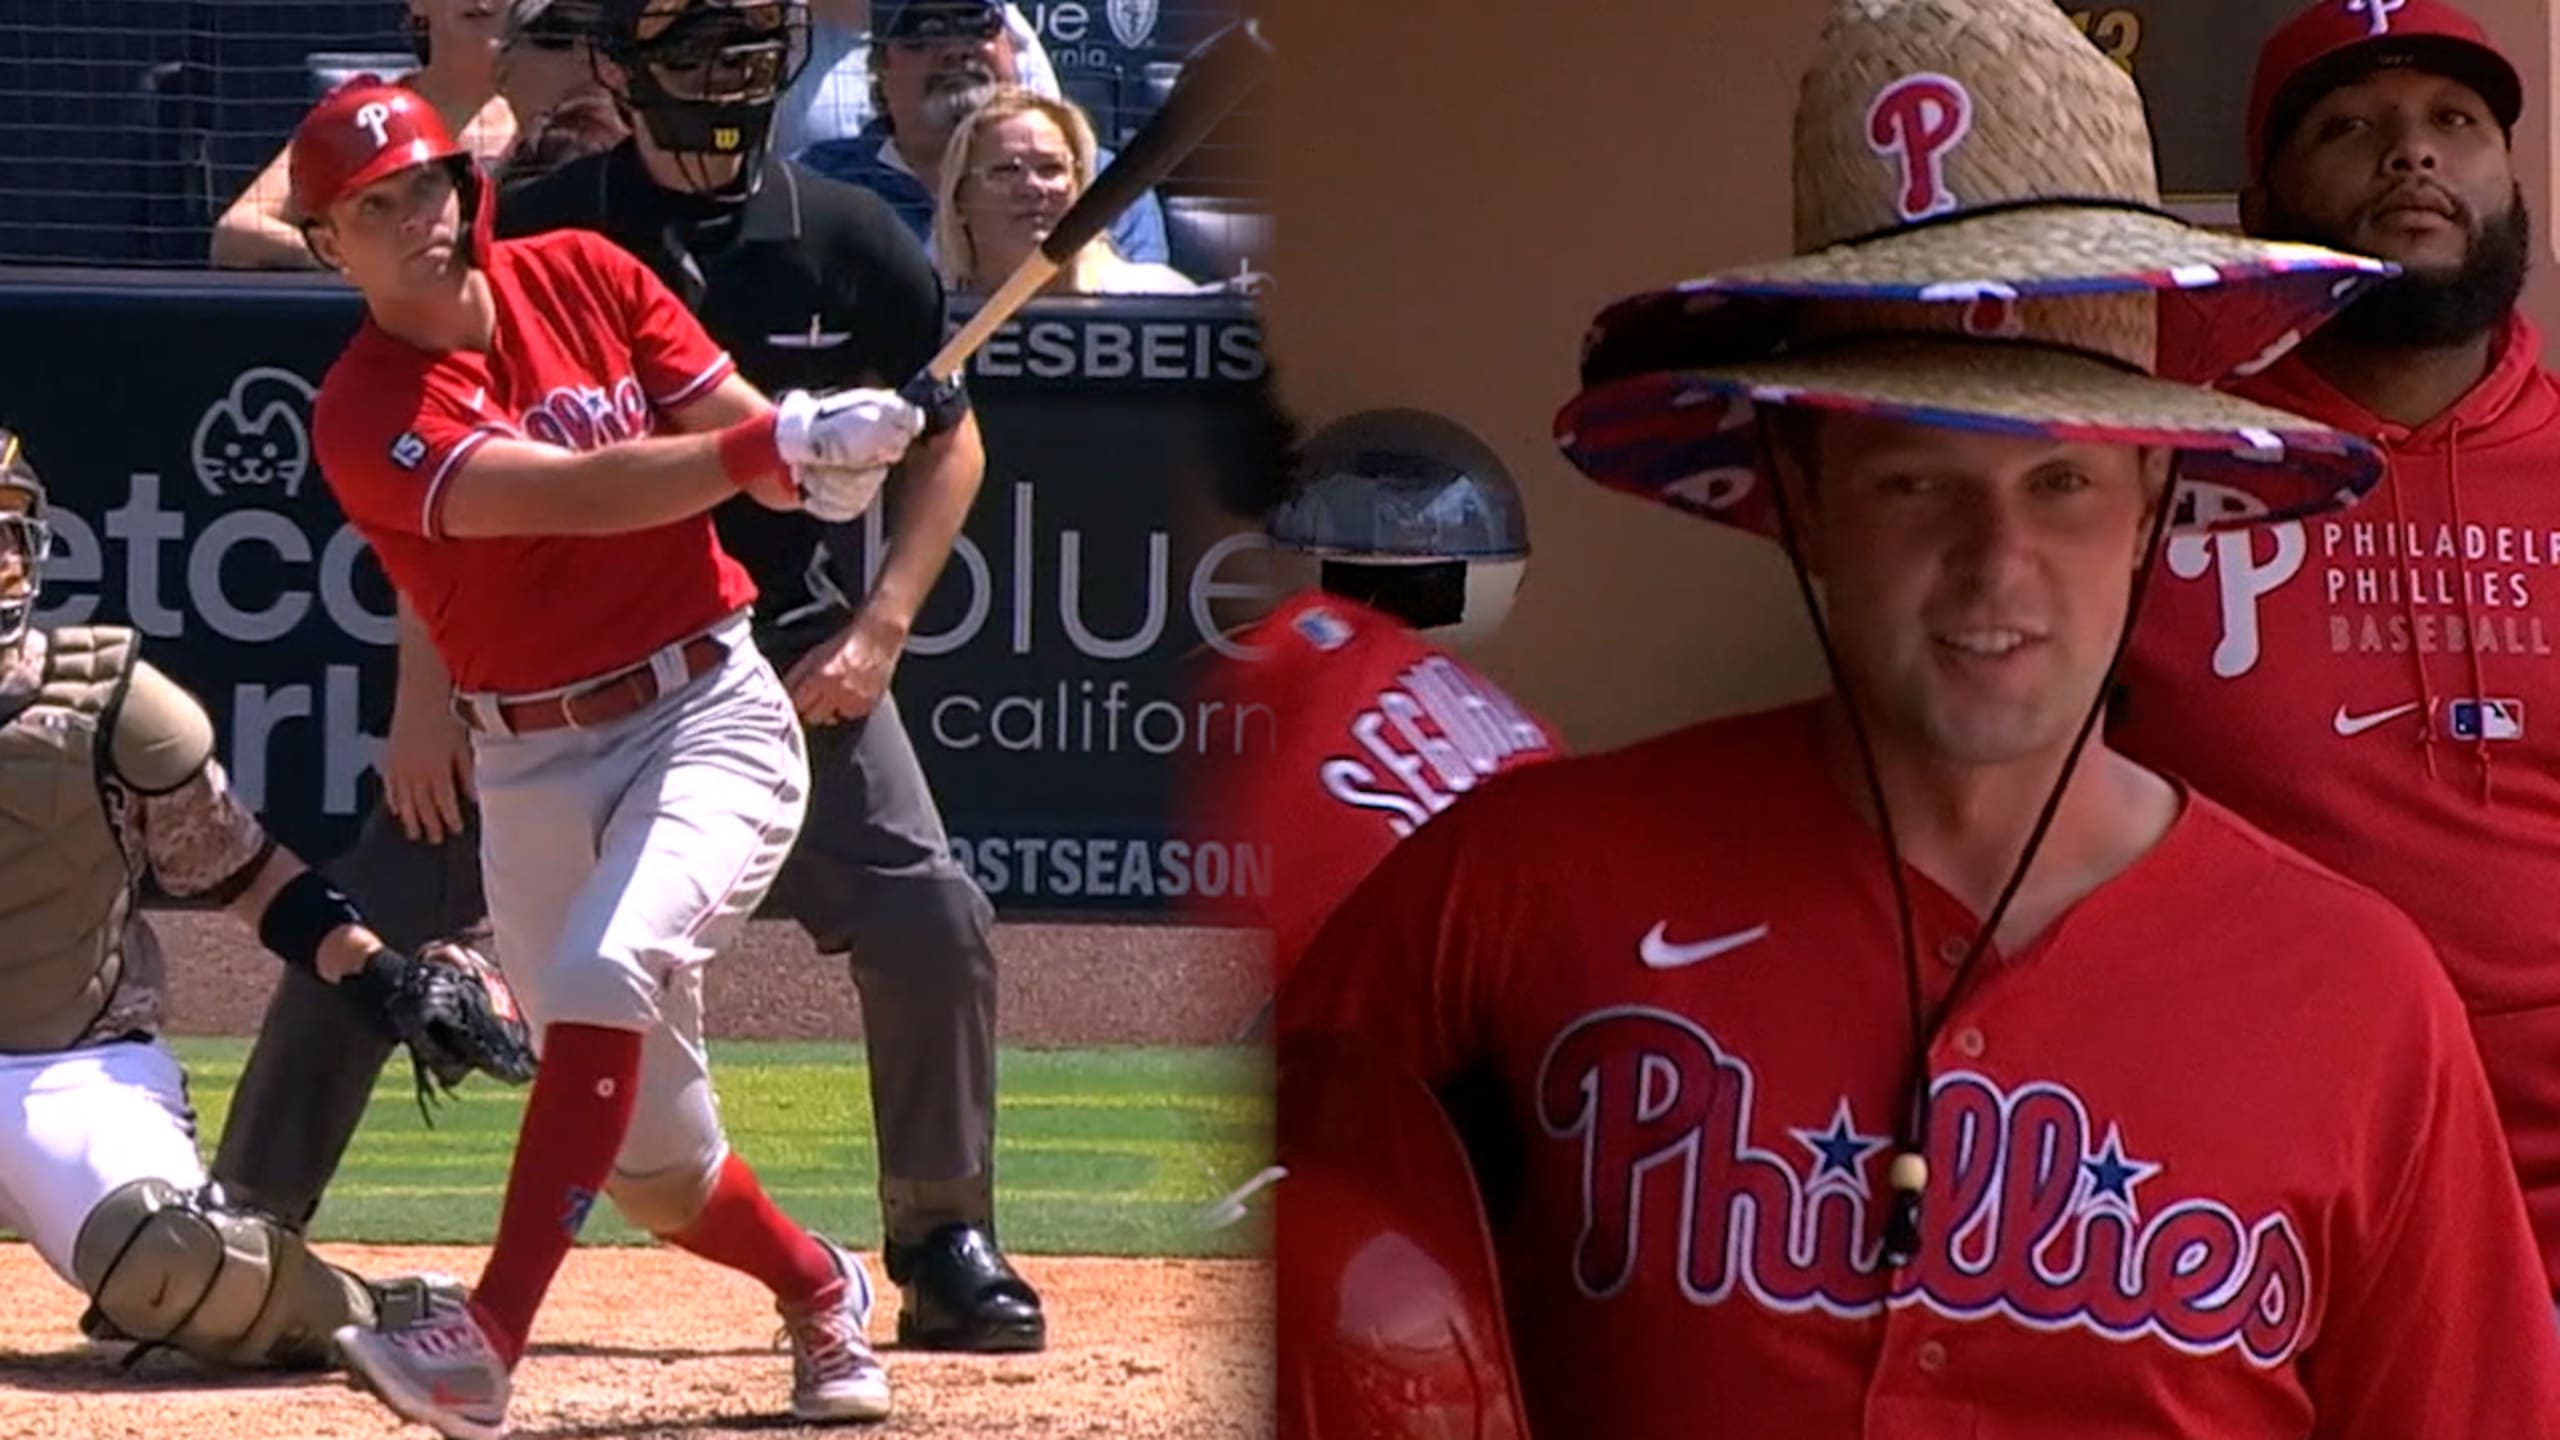 Philadelphia Phillies - Rhys Hoskins and Alec Bohm, wearing the red  pinstripe uniforms, celebrating after the Phillies win the game.